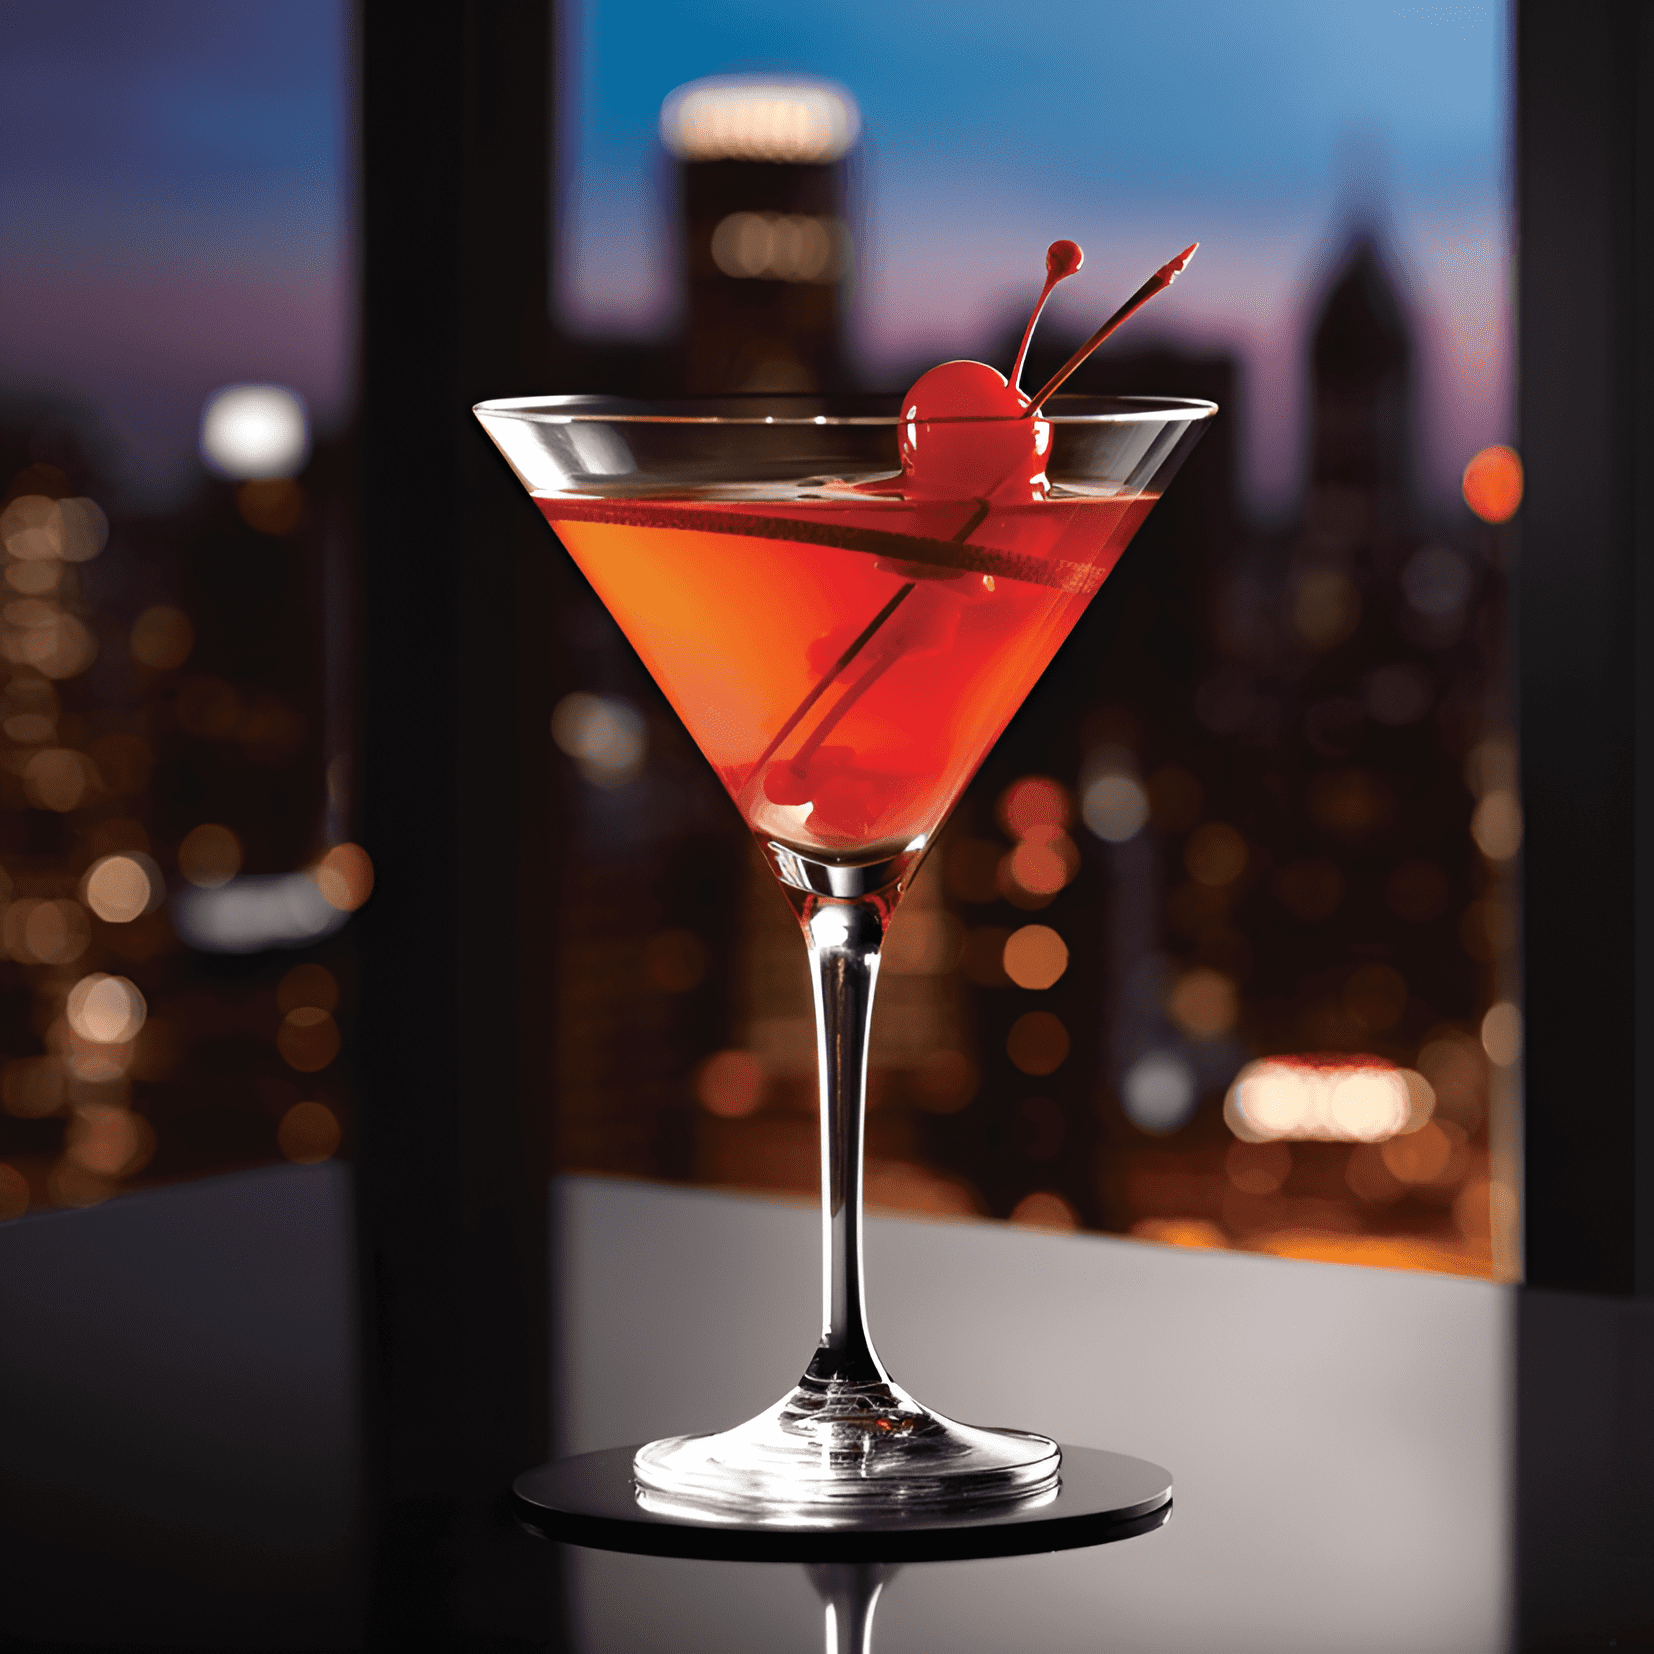 New York Cocktail Recipe - The New York Cocktail has a strong, bold taste with a hint of sweetness. The combination of whiskey, lemon juice, and grenadine creates a balanced flavor profile that is both sour and sweet. The drink is also slightly fruity, with a warming sensation from the whiskey.